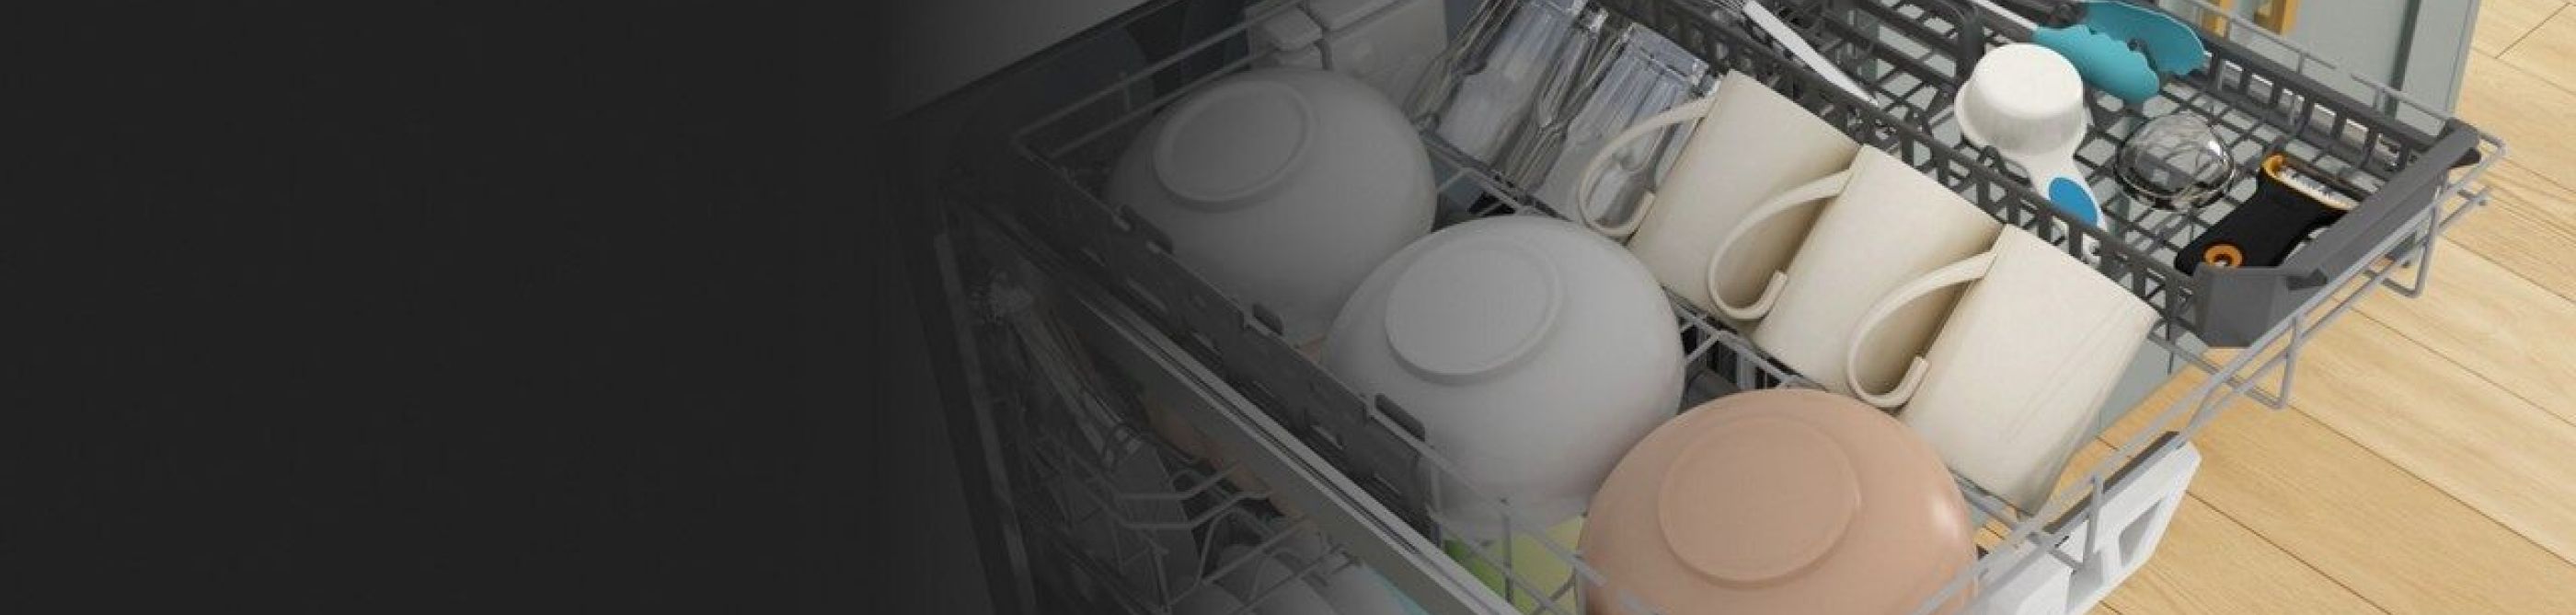 Bowls, mugs and utensils loaded in the 3rd rack of a dishwasher